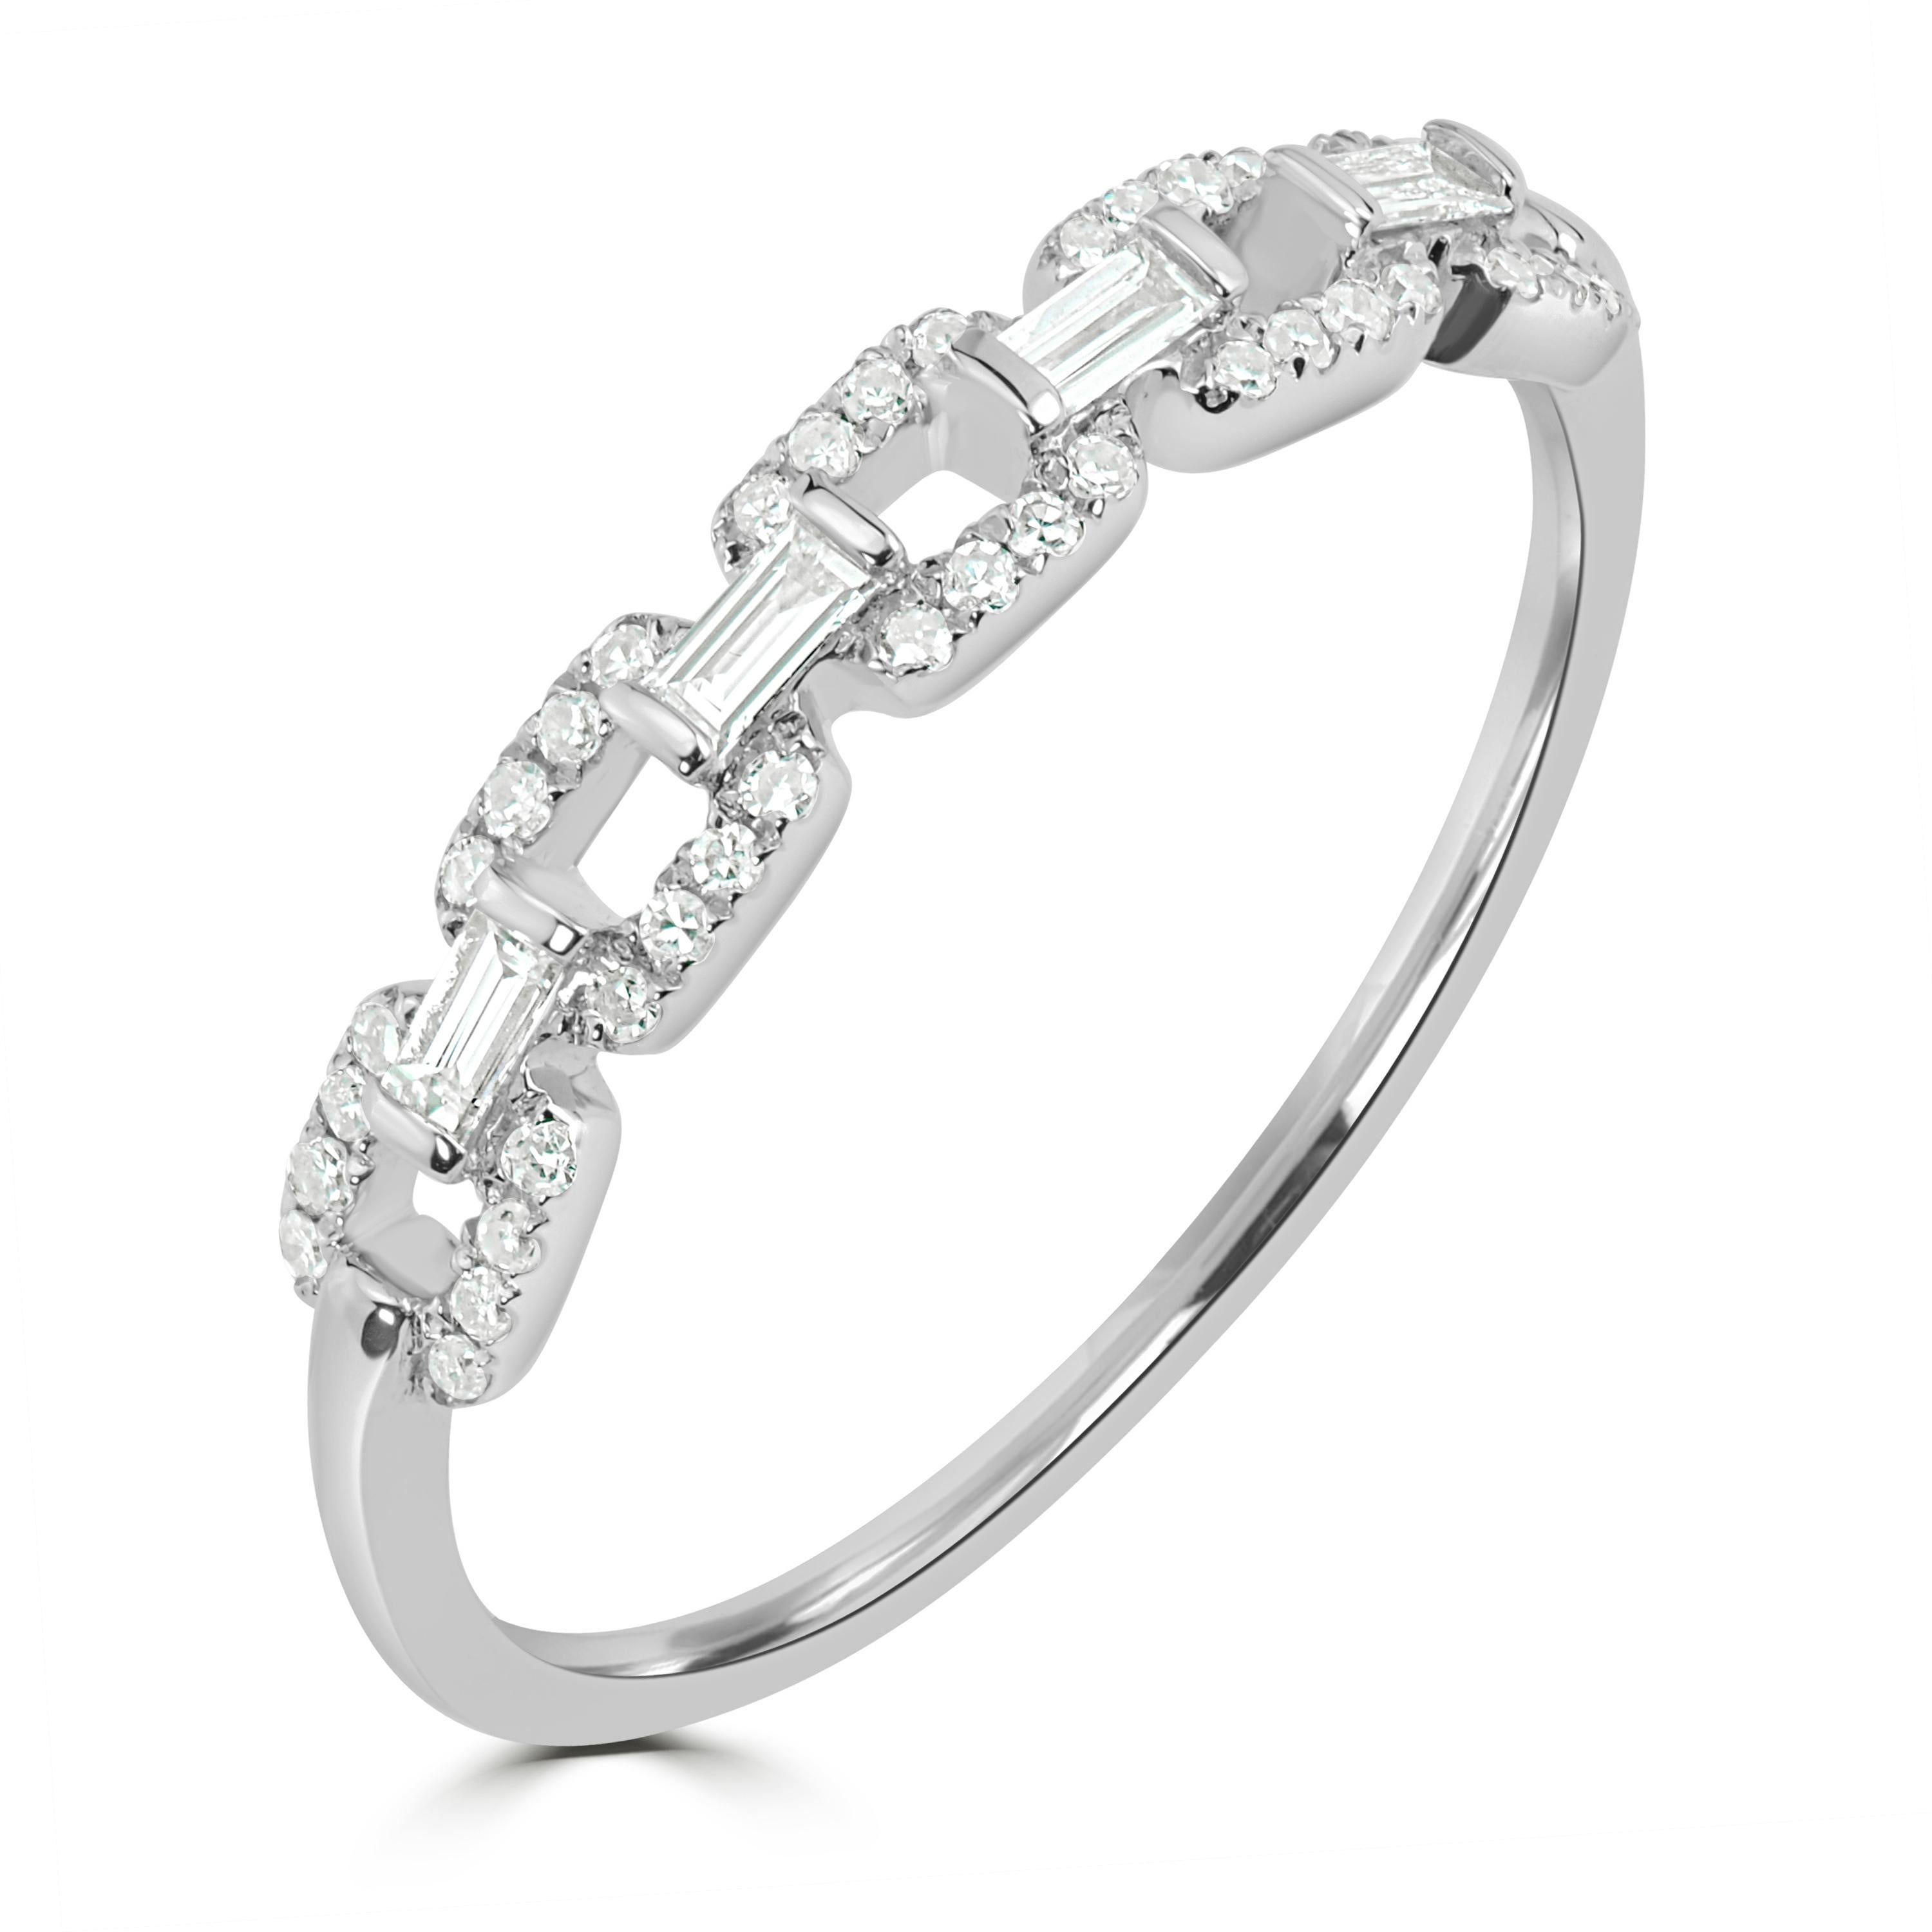 This Luxle classic ring showcases an openwork design paved with baguette and round cut diamonds set in 18K white gold that would make a lovely choice for your anniversary or wedding band.

Please follow the Luxury Jewels storefront to view the